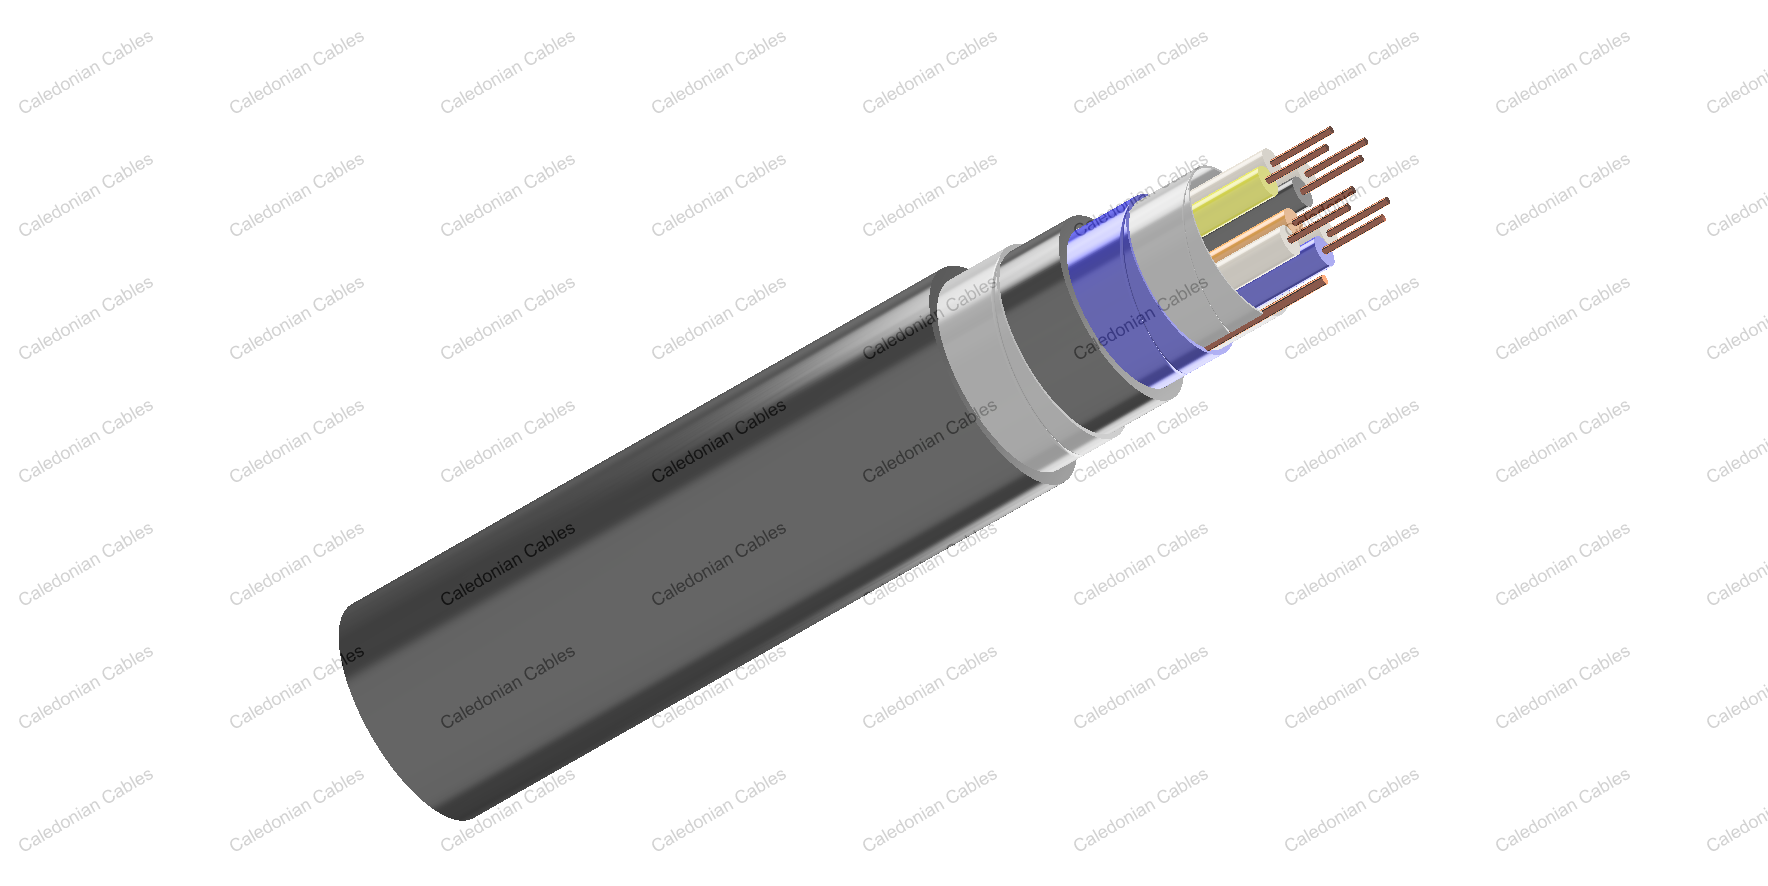 K13 PVC Subway Signalling Cables for Metro/Local Trains/Tramlines